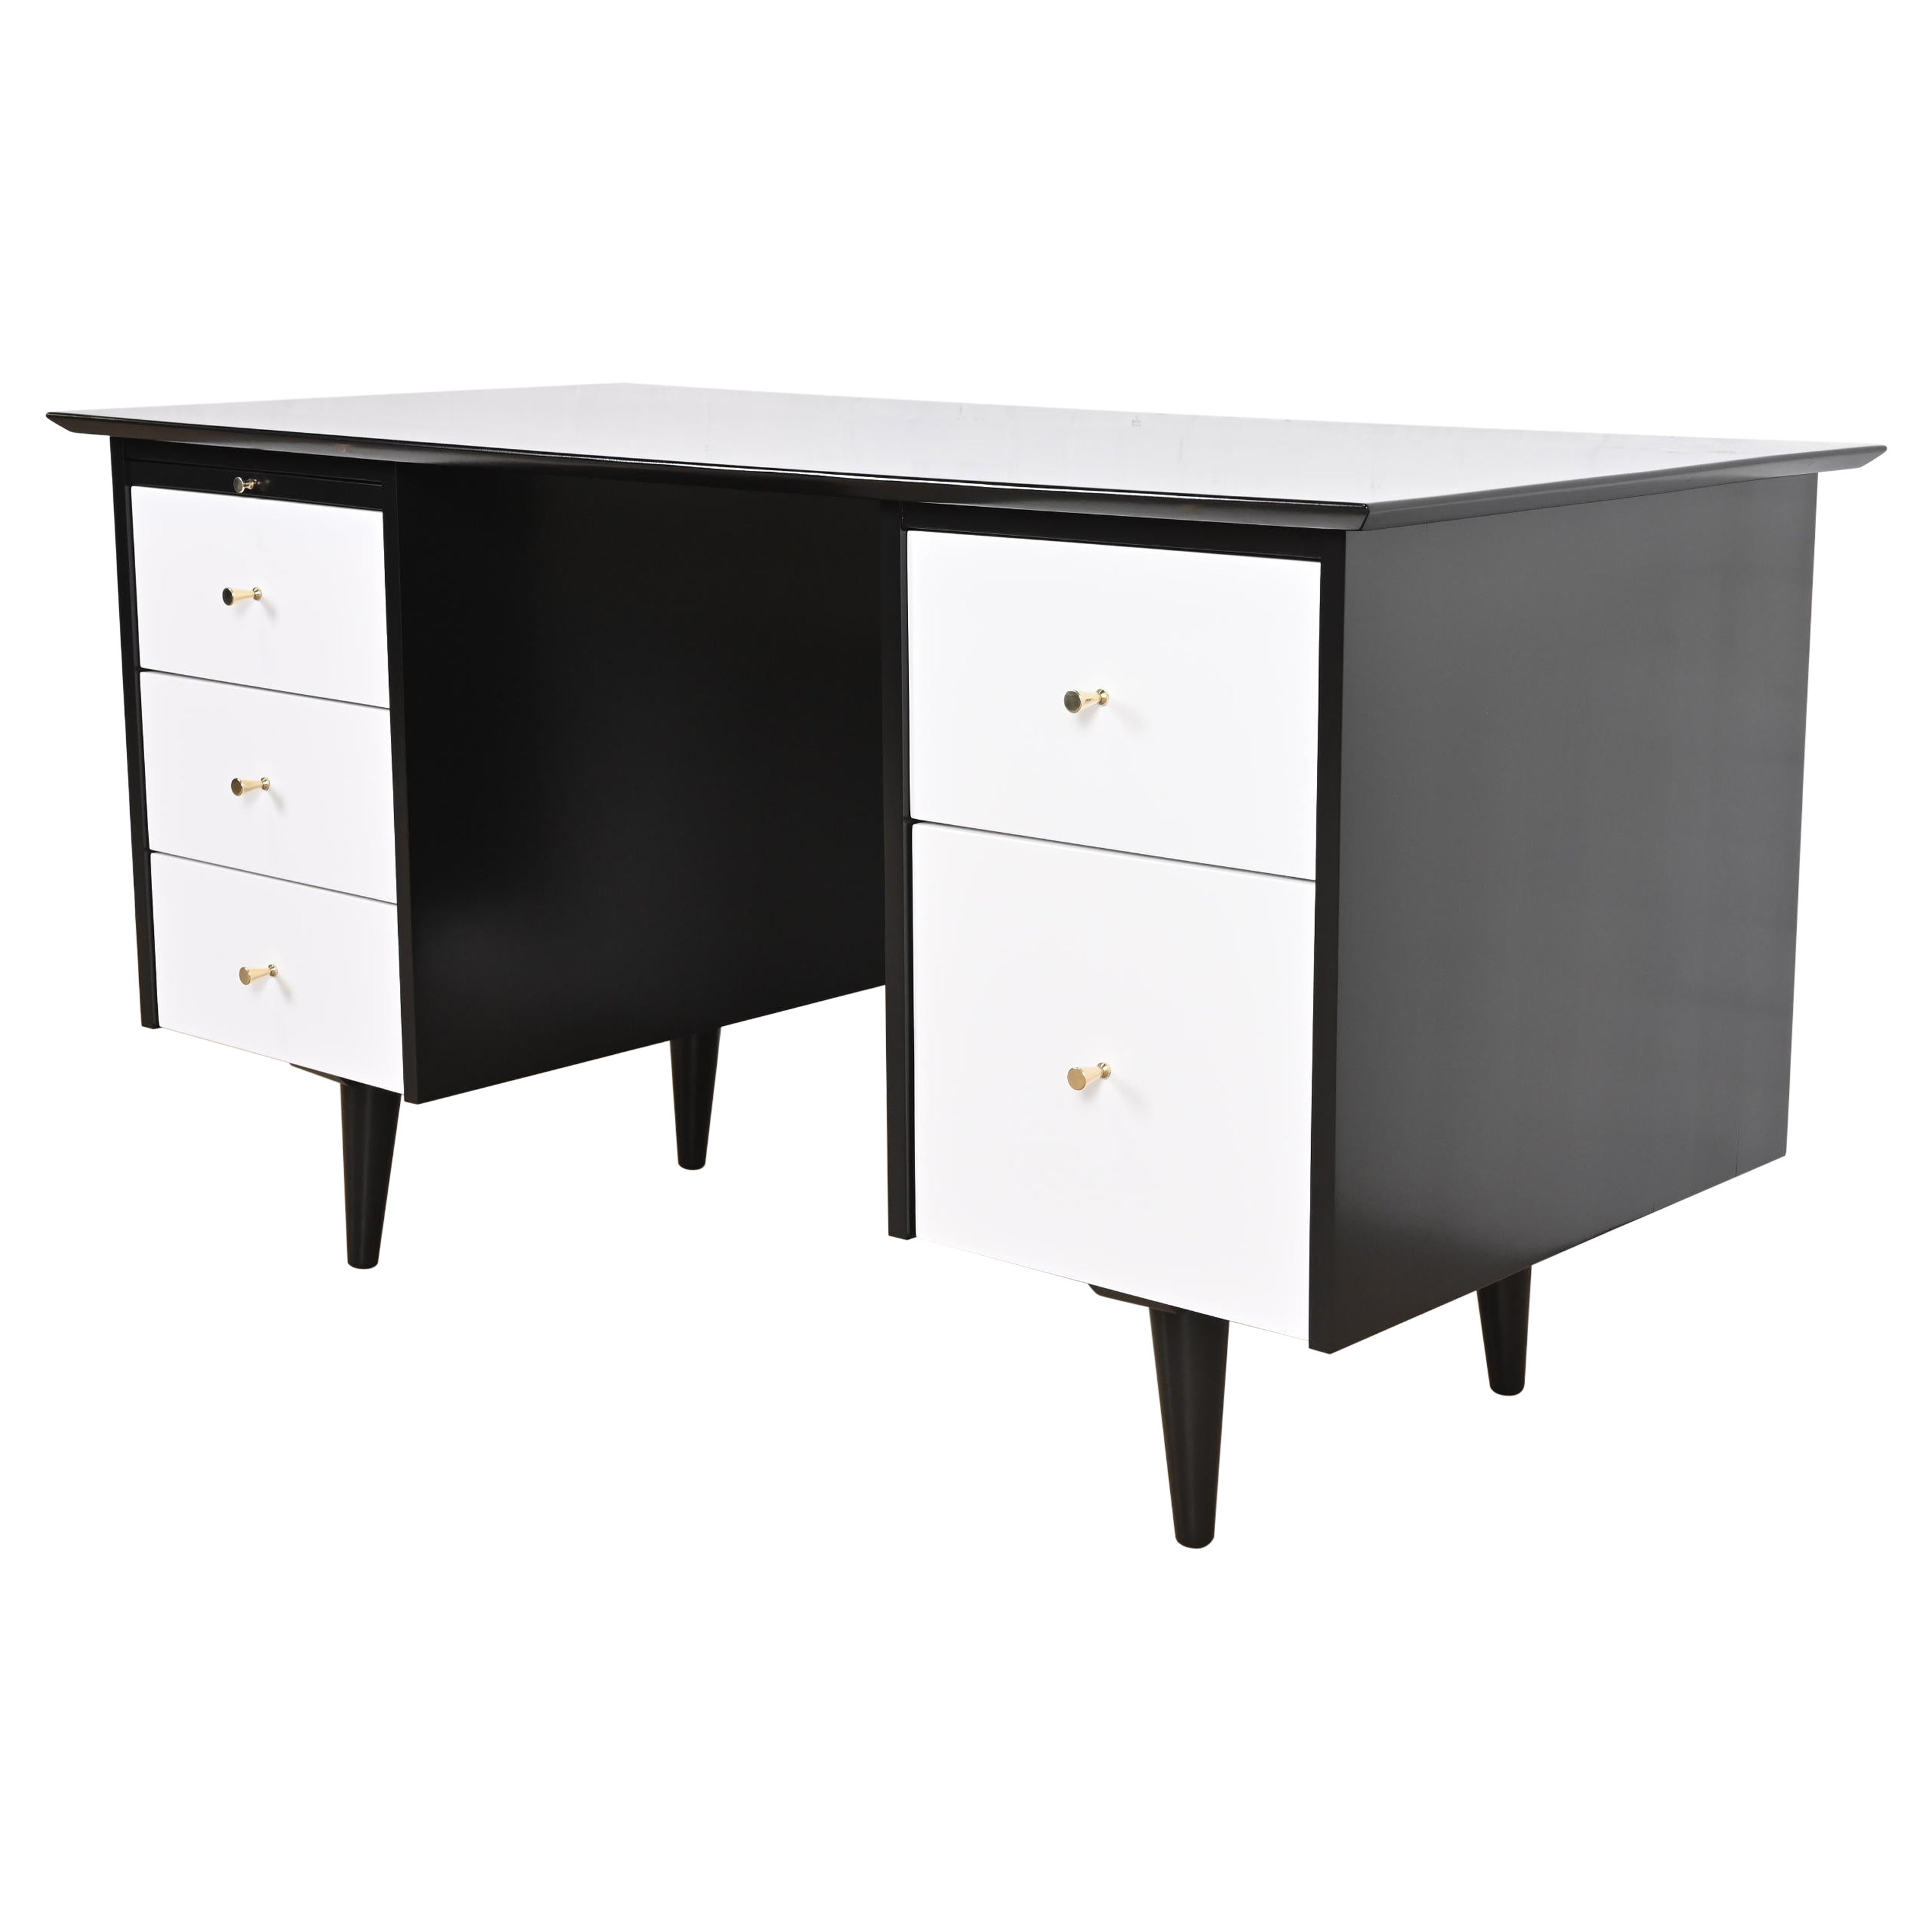 Paul McCobb Planner Group Black and White Lacquered Double Pedestal Desk, 1950s For Sale